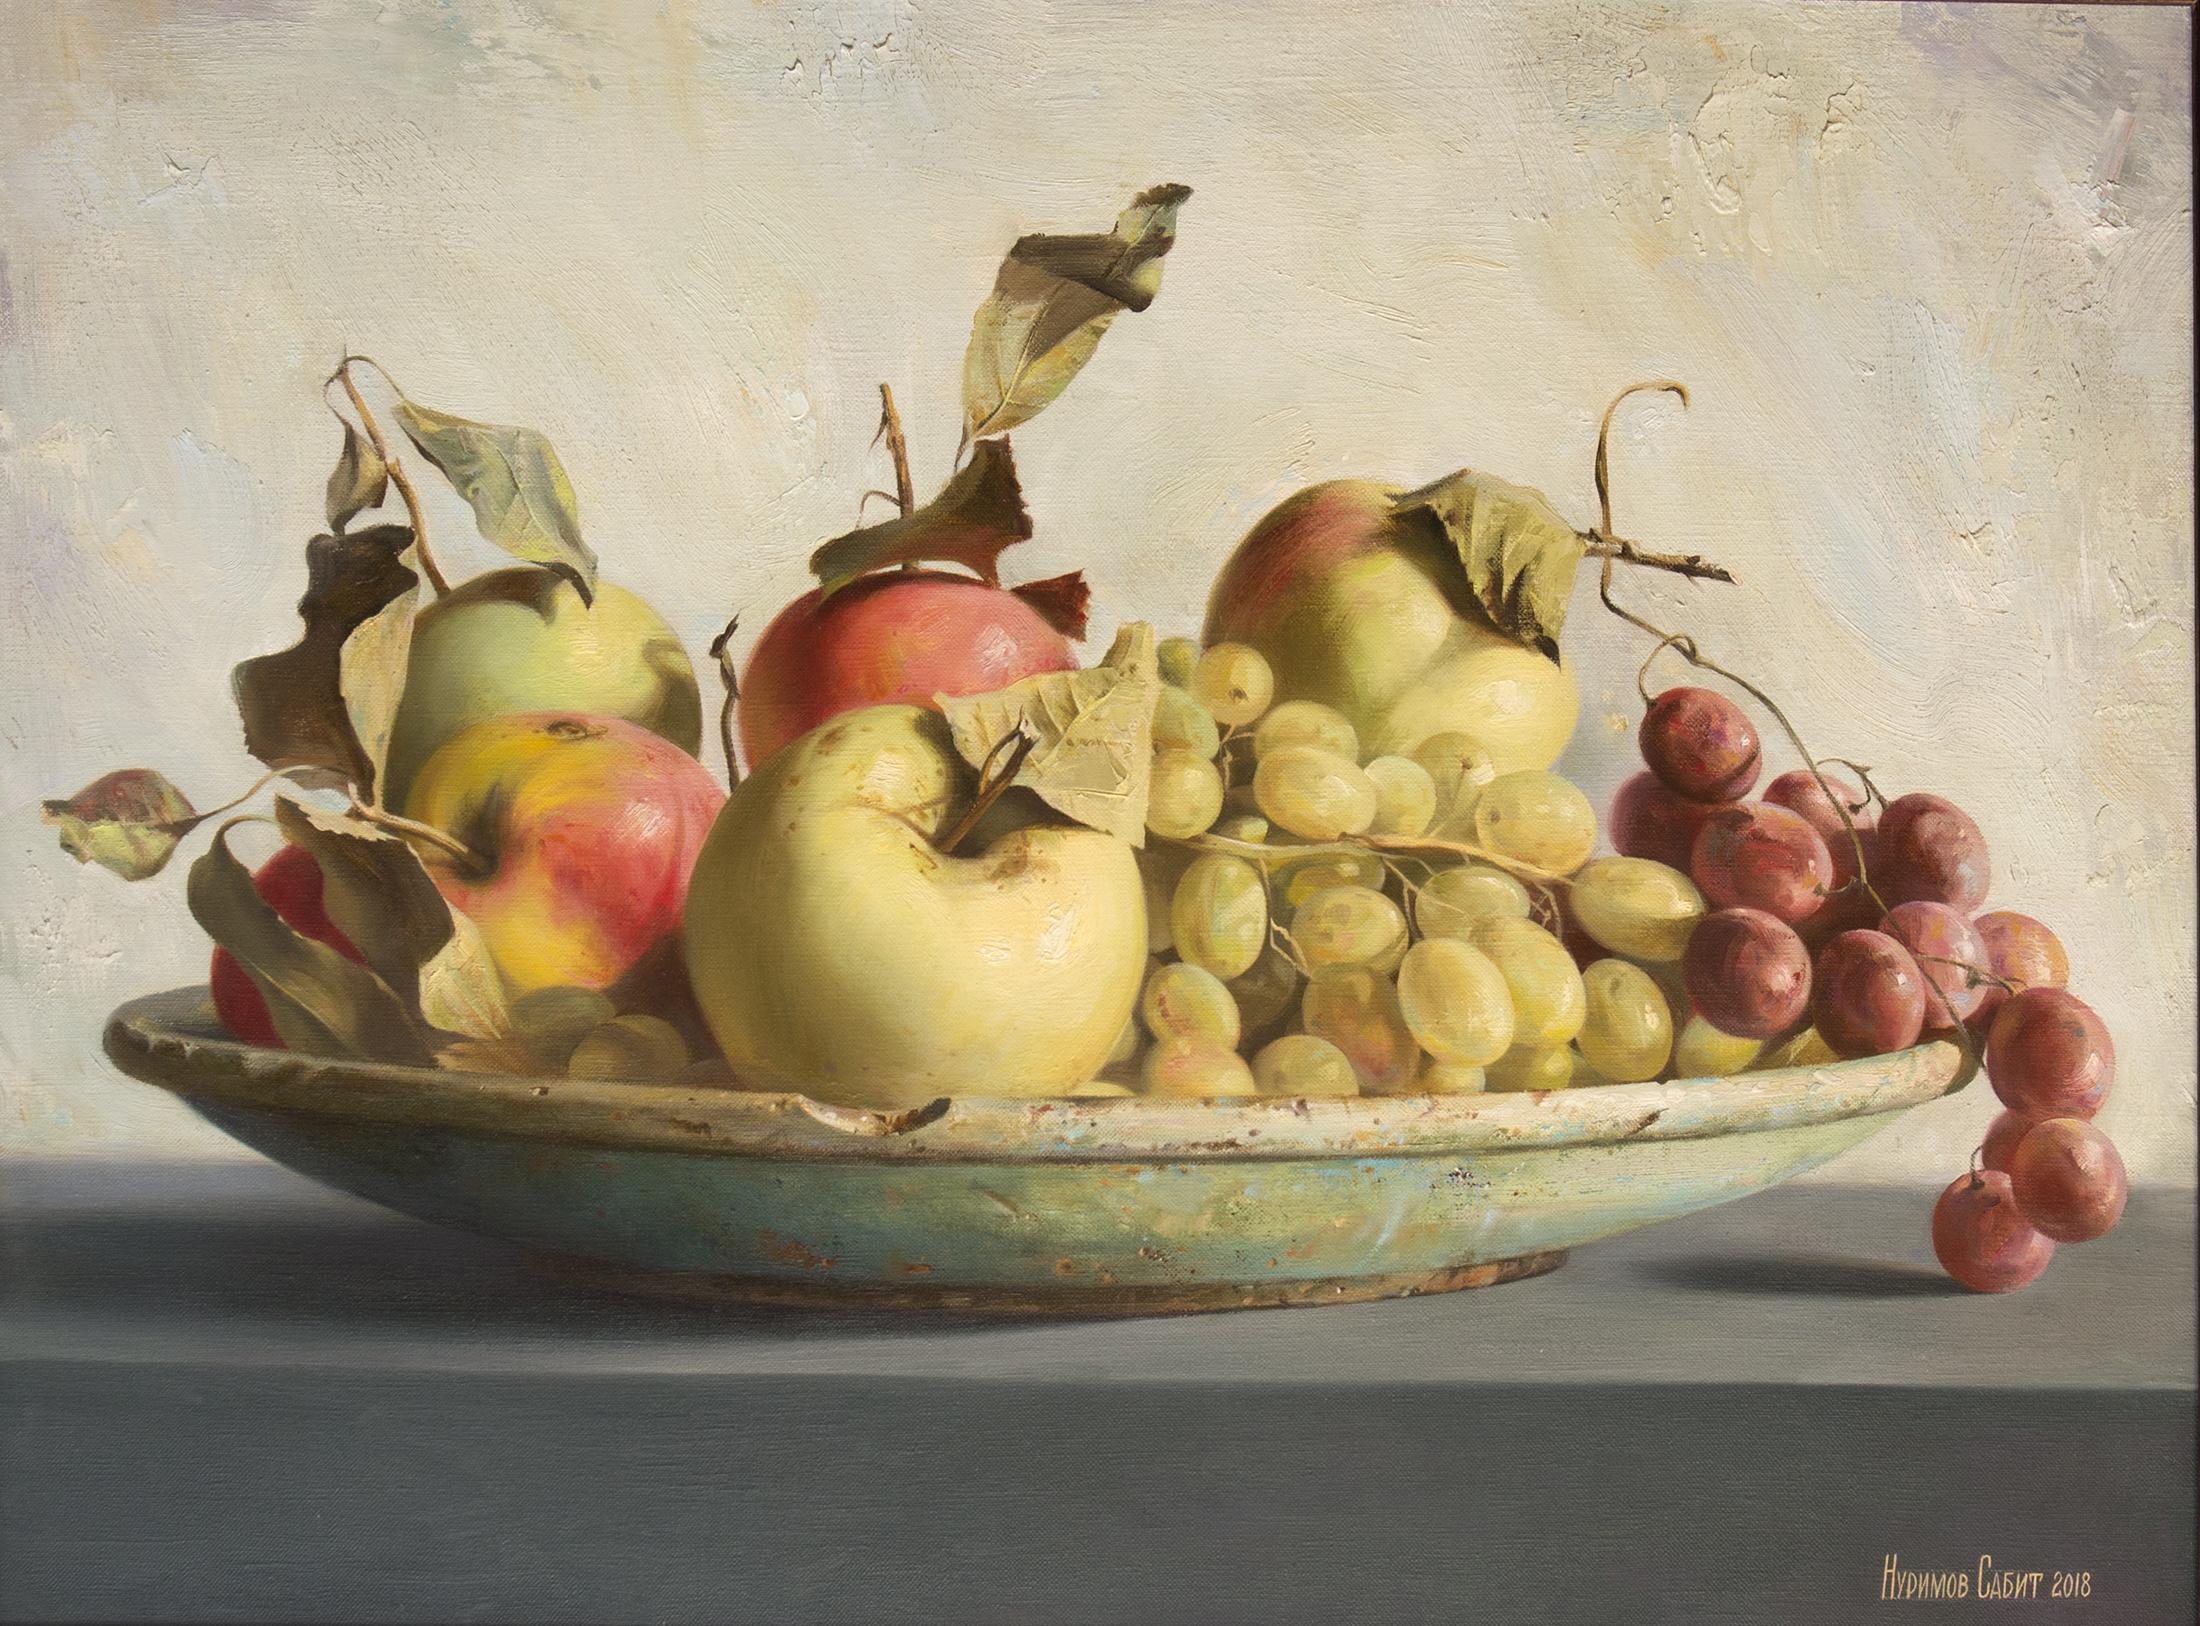 Apples and grapes